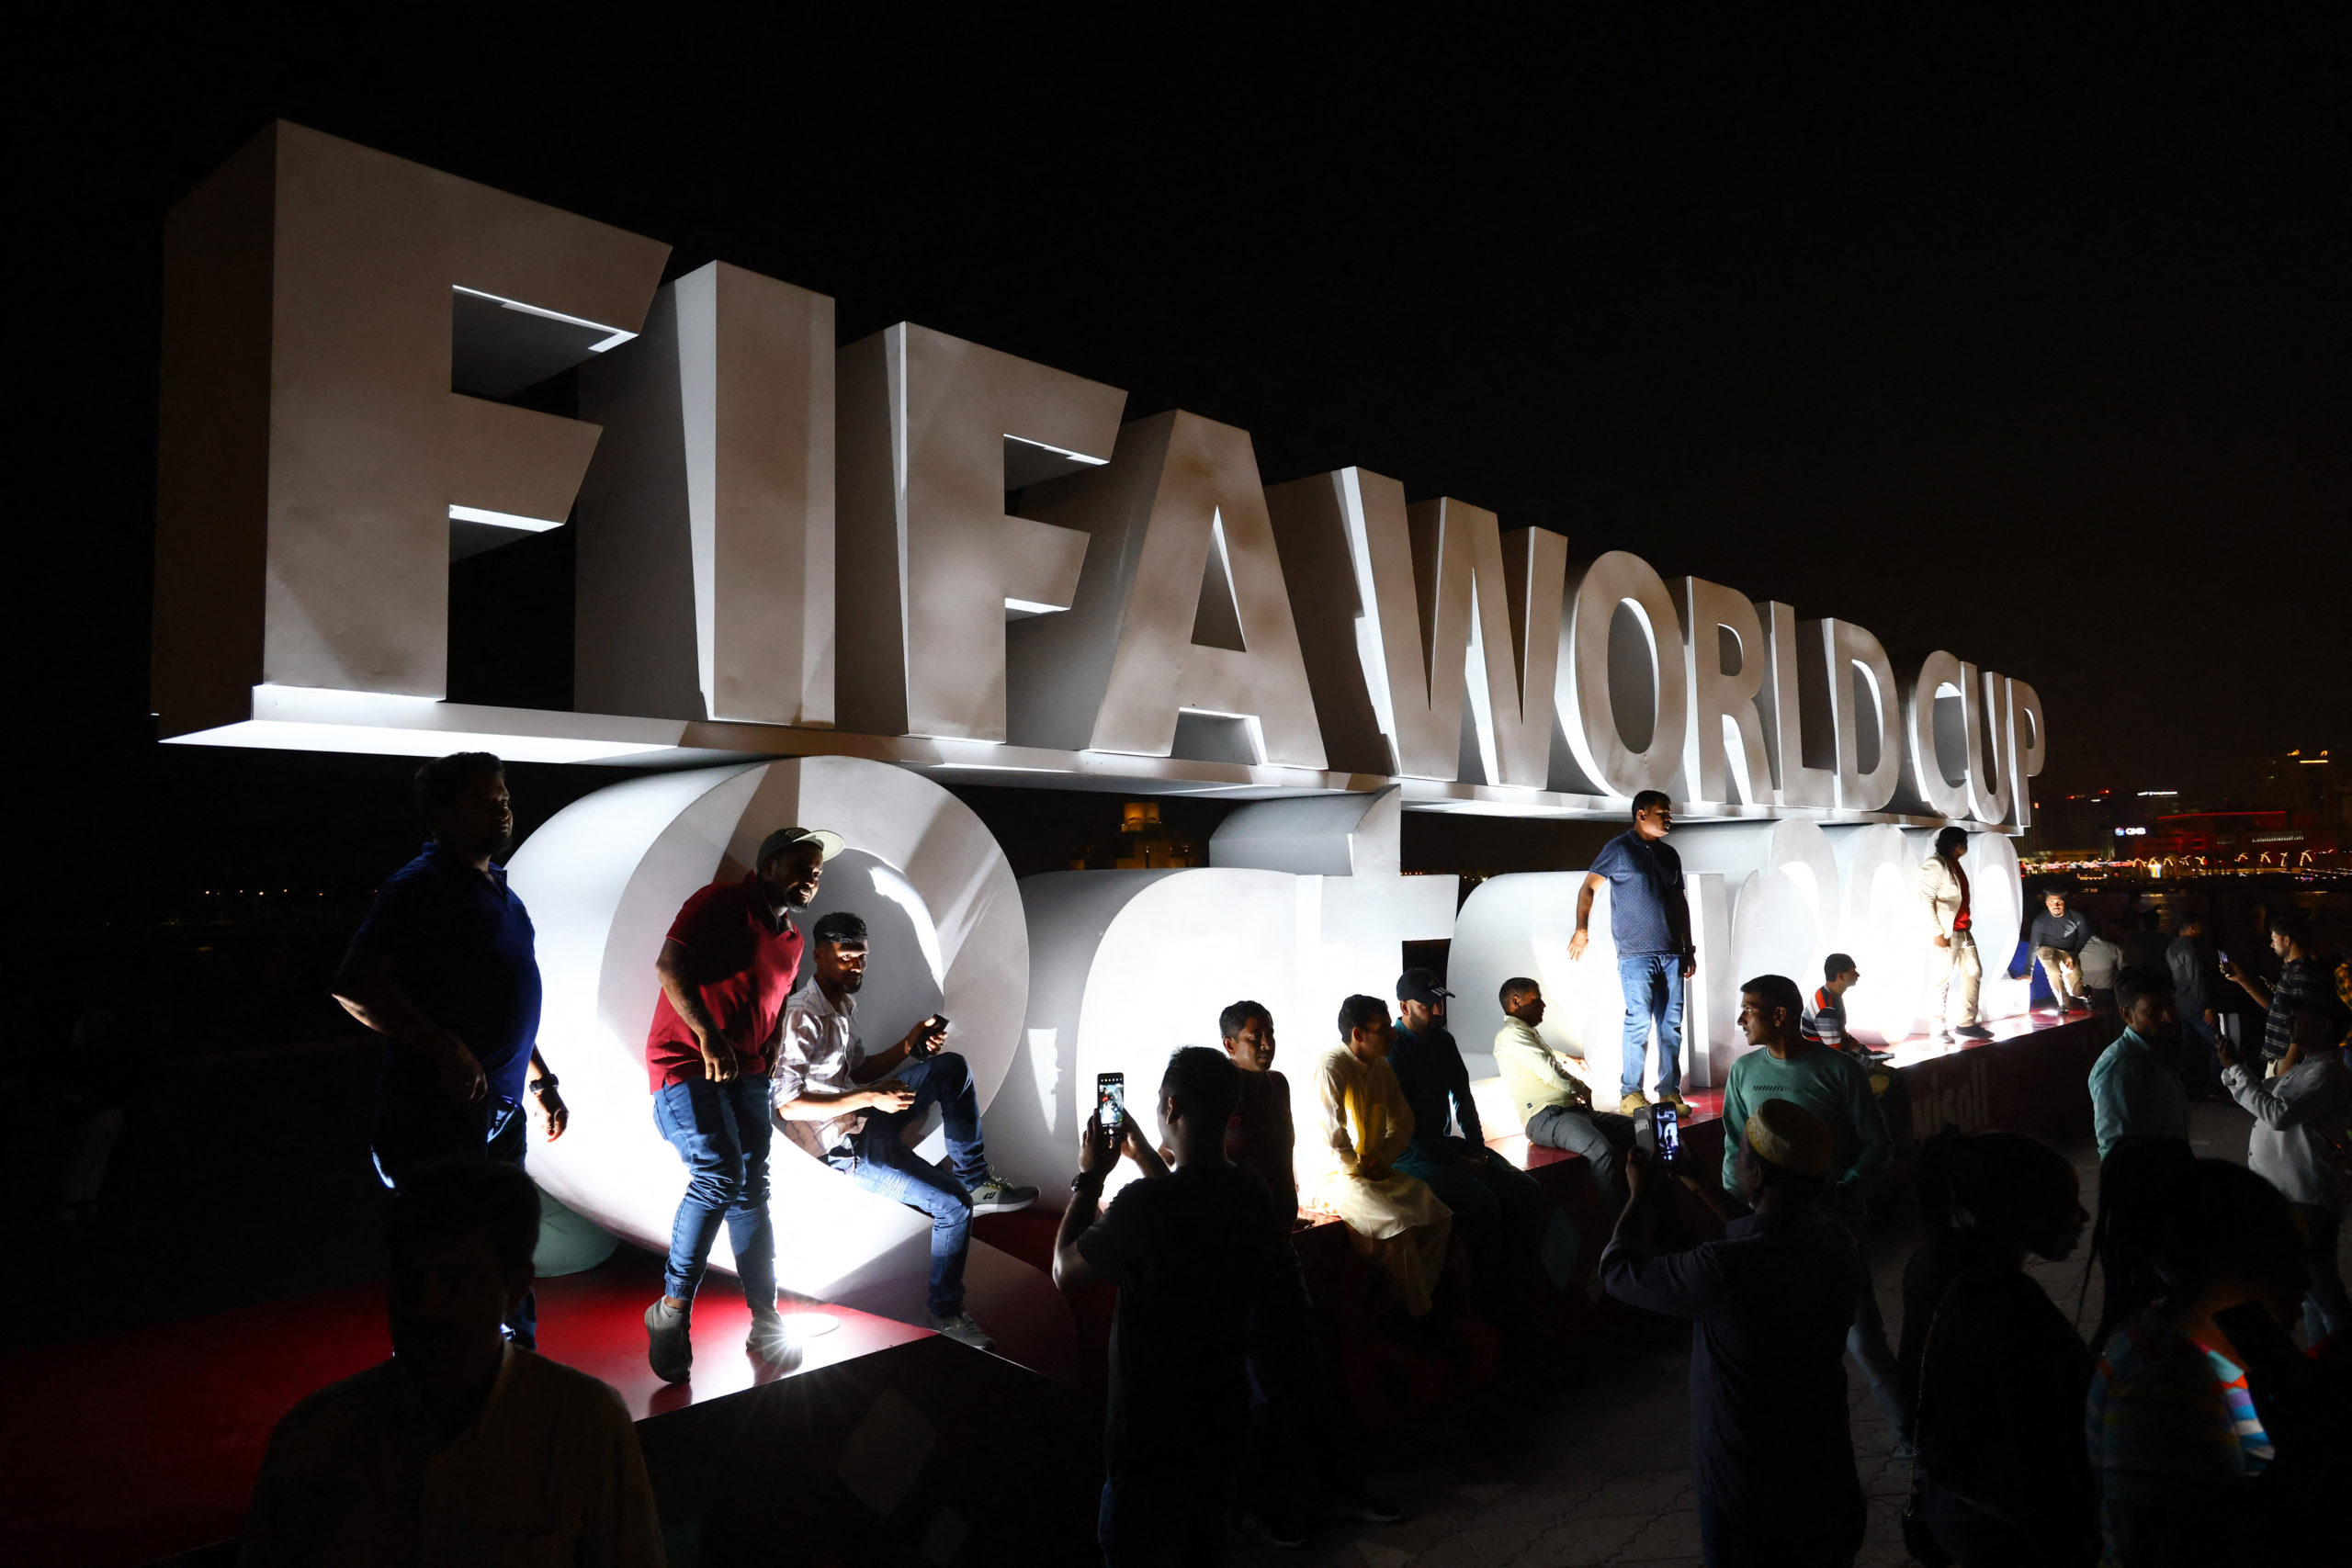 FILE PHOTO: Soccer Football - FIFA World Cup Qatar 2022 Preview, Doha, Qatar - November 18, 2022  Fans take pictures with the FIFA World Cup logo on the Corniche Promenade ahead of the FIFA World Cup Qatar 2022 